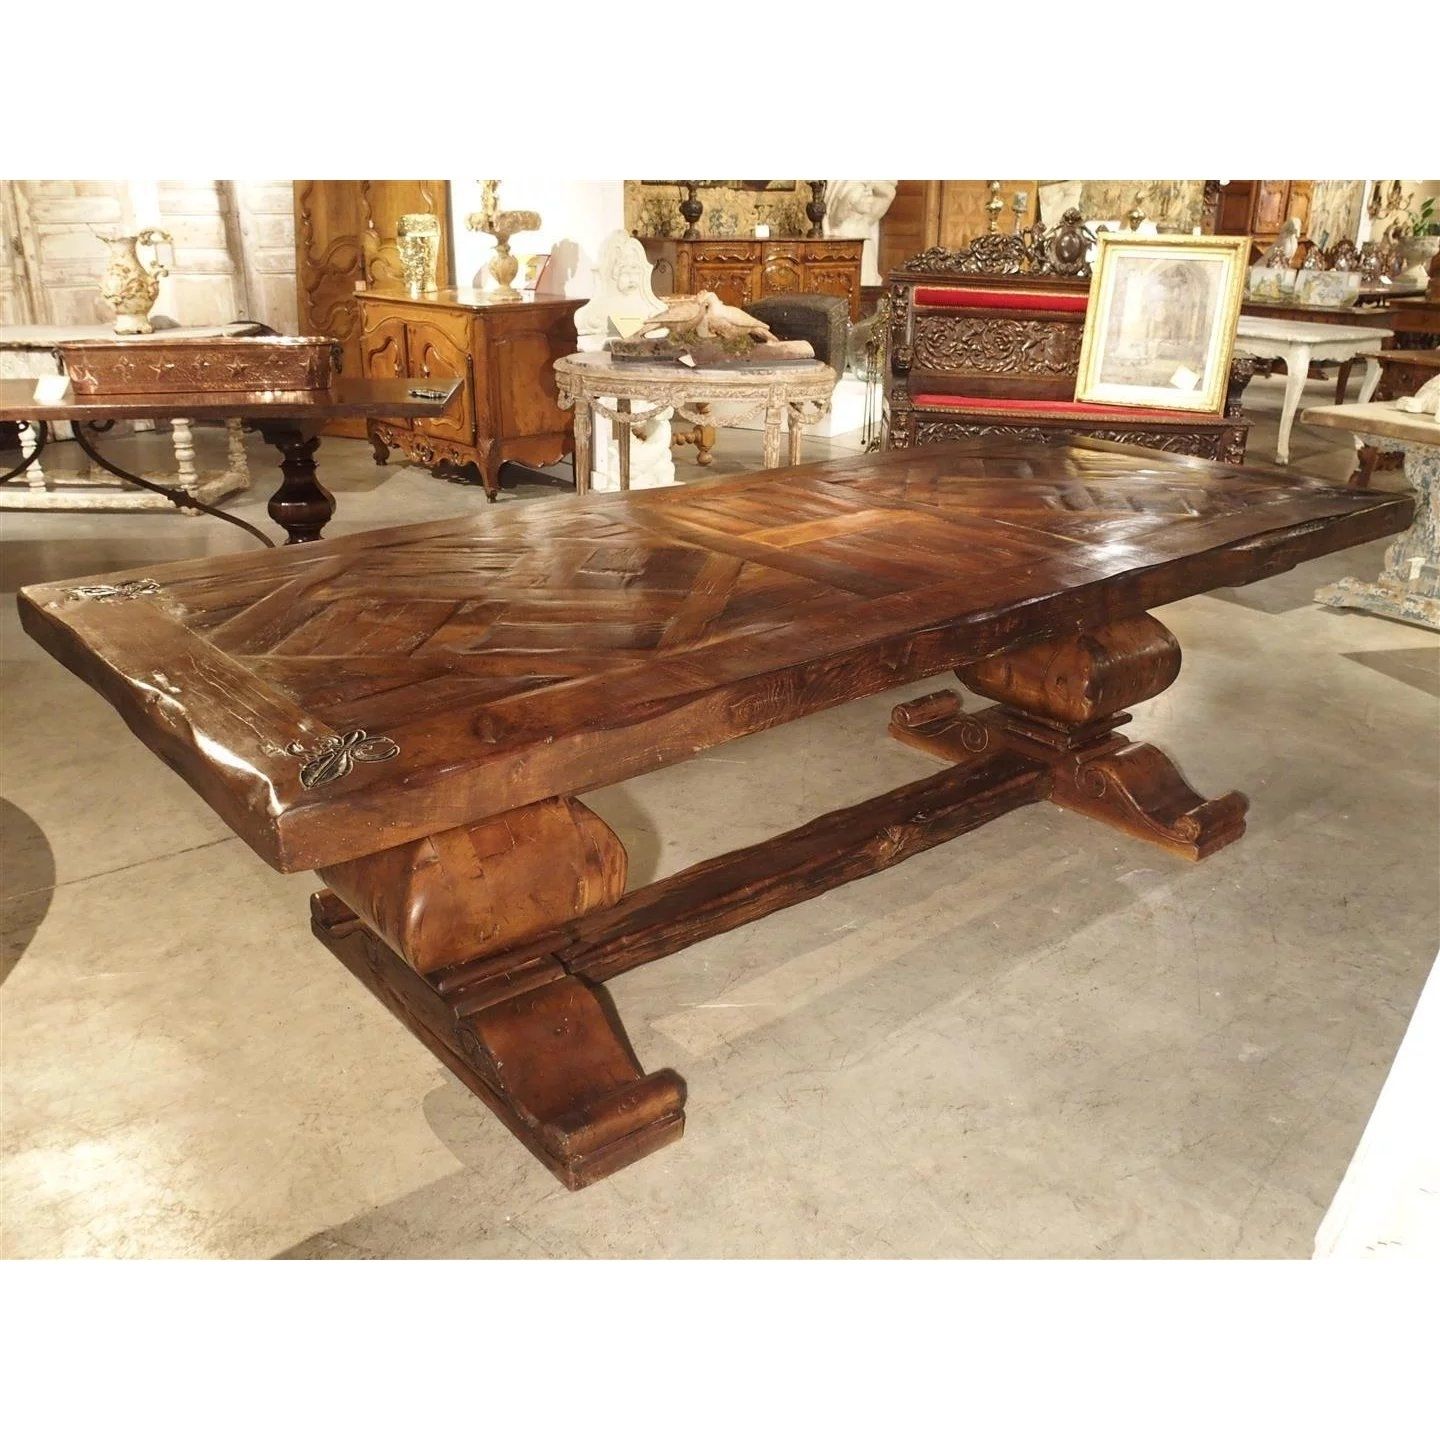 Large French Oak Dining Table With Parquet Top And Fleur De Lys : Le Within Best And Newest Parquet 6 Piece Dining Sets (View 19 of 20)